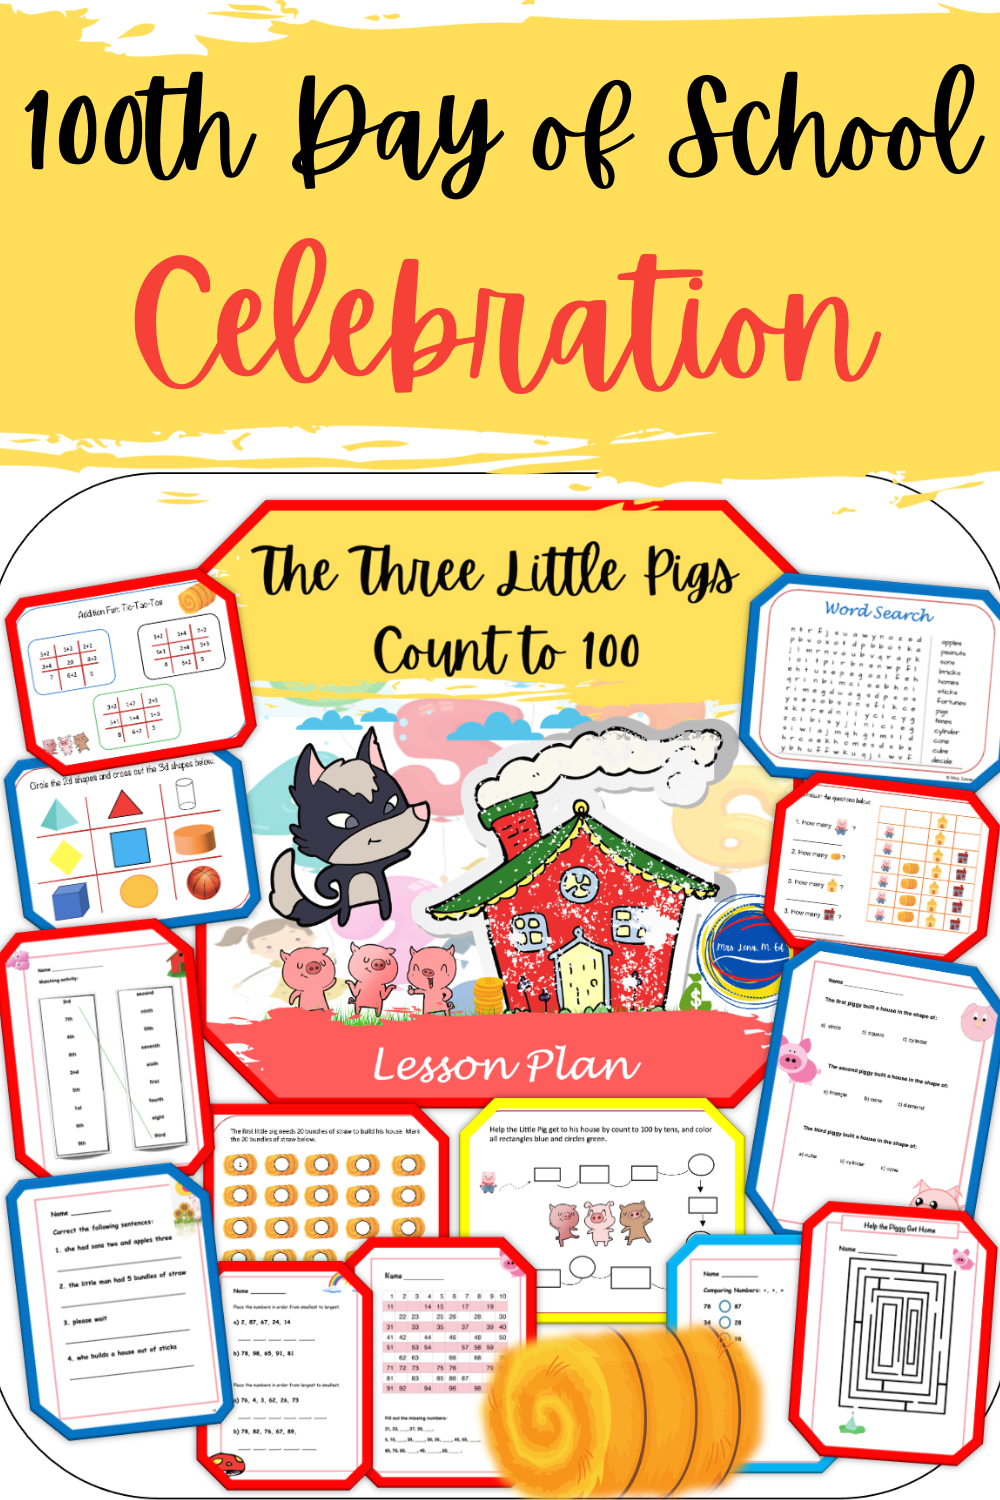 The Three Little Pigs Count to 100 by Grace Maccarone Hundred Days of School Lesson and Activities